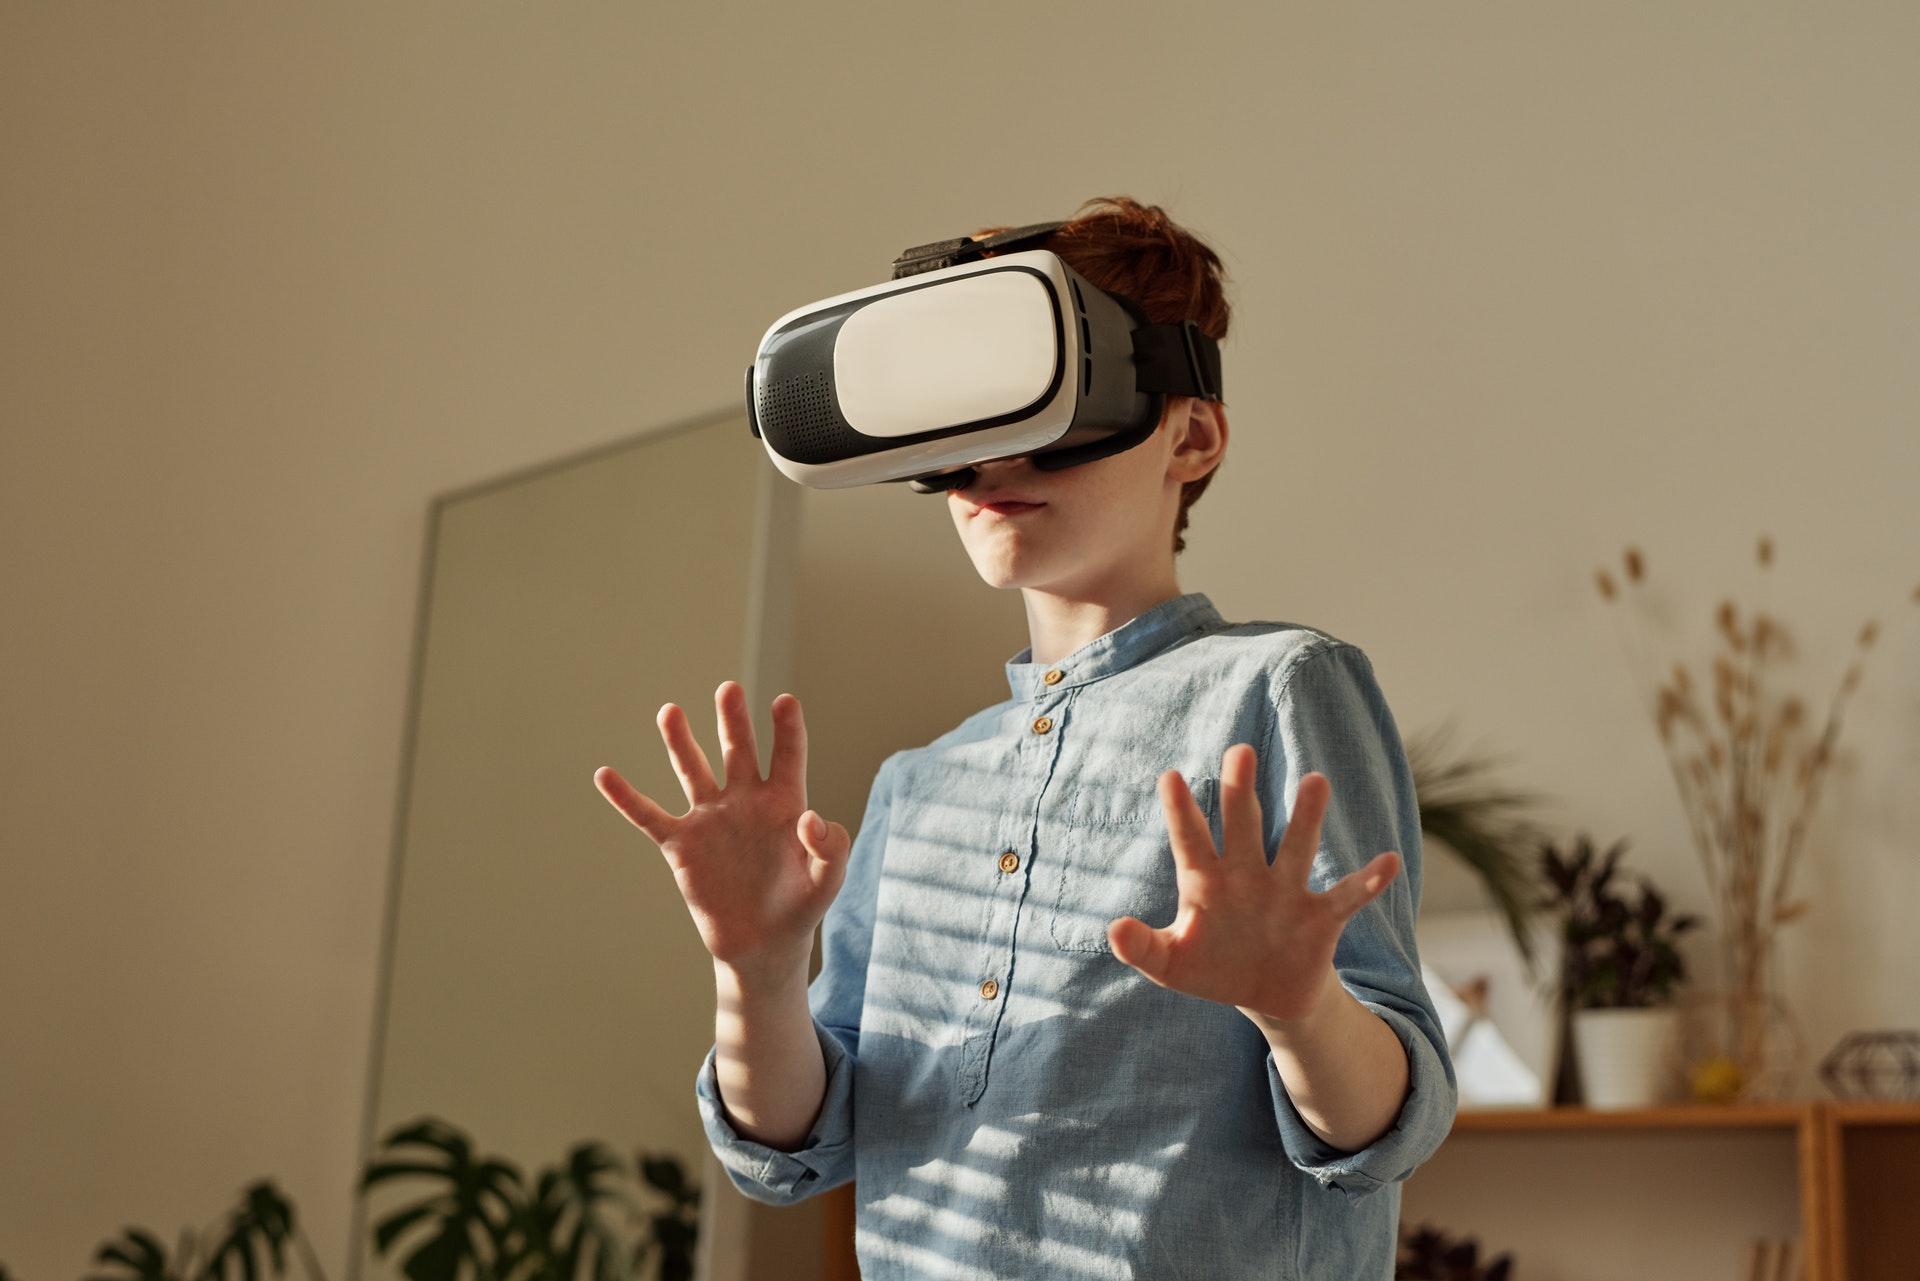 Optima Domi Partners with ManageXR to Help Manage Devices at Its Virtual Reality School